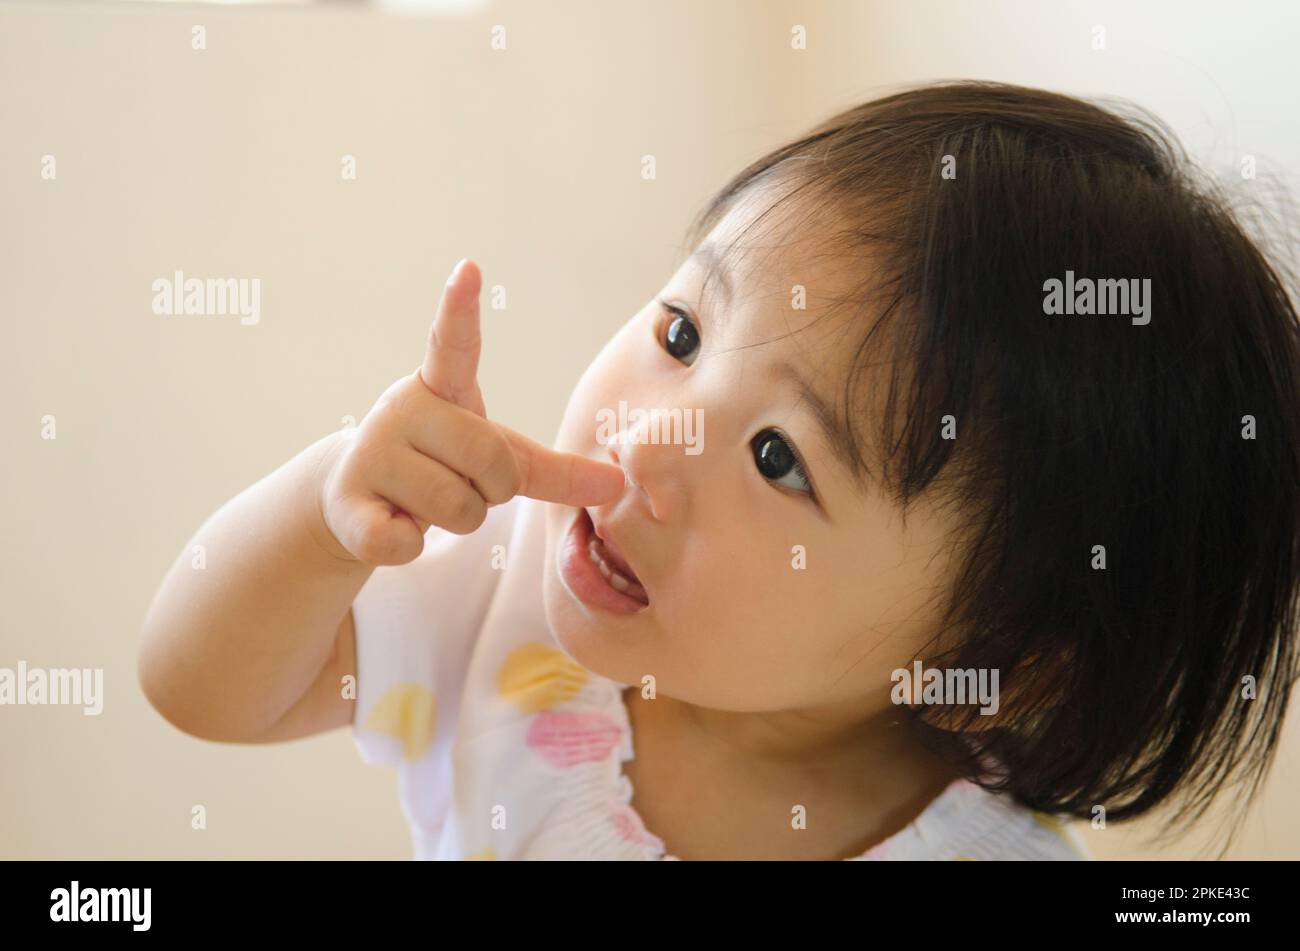 Girl pointing Stock Photo